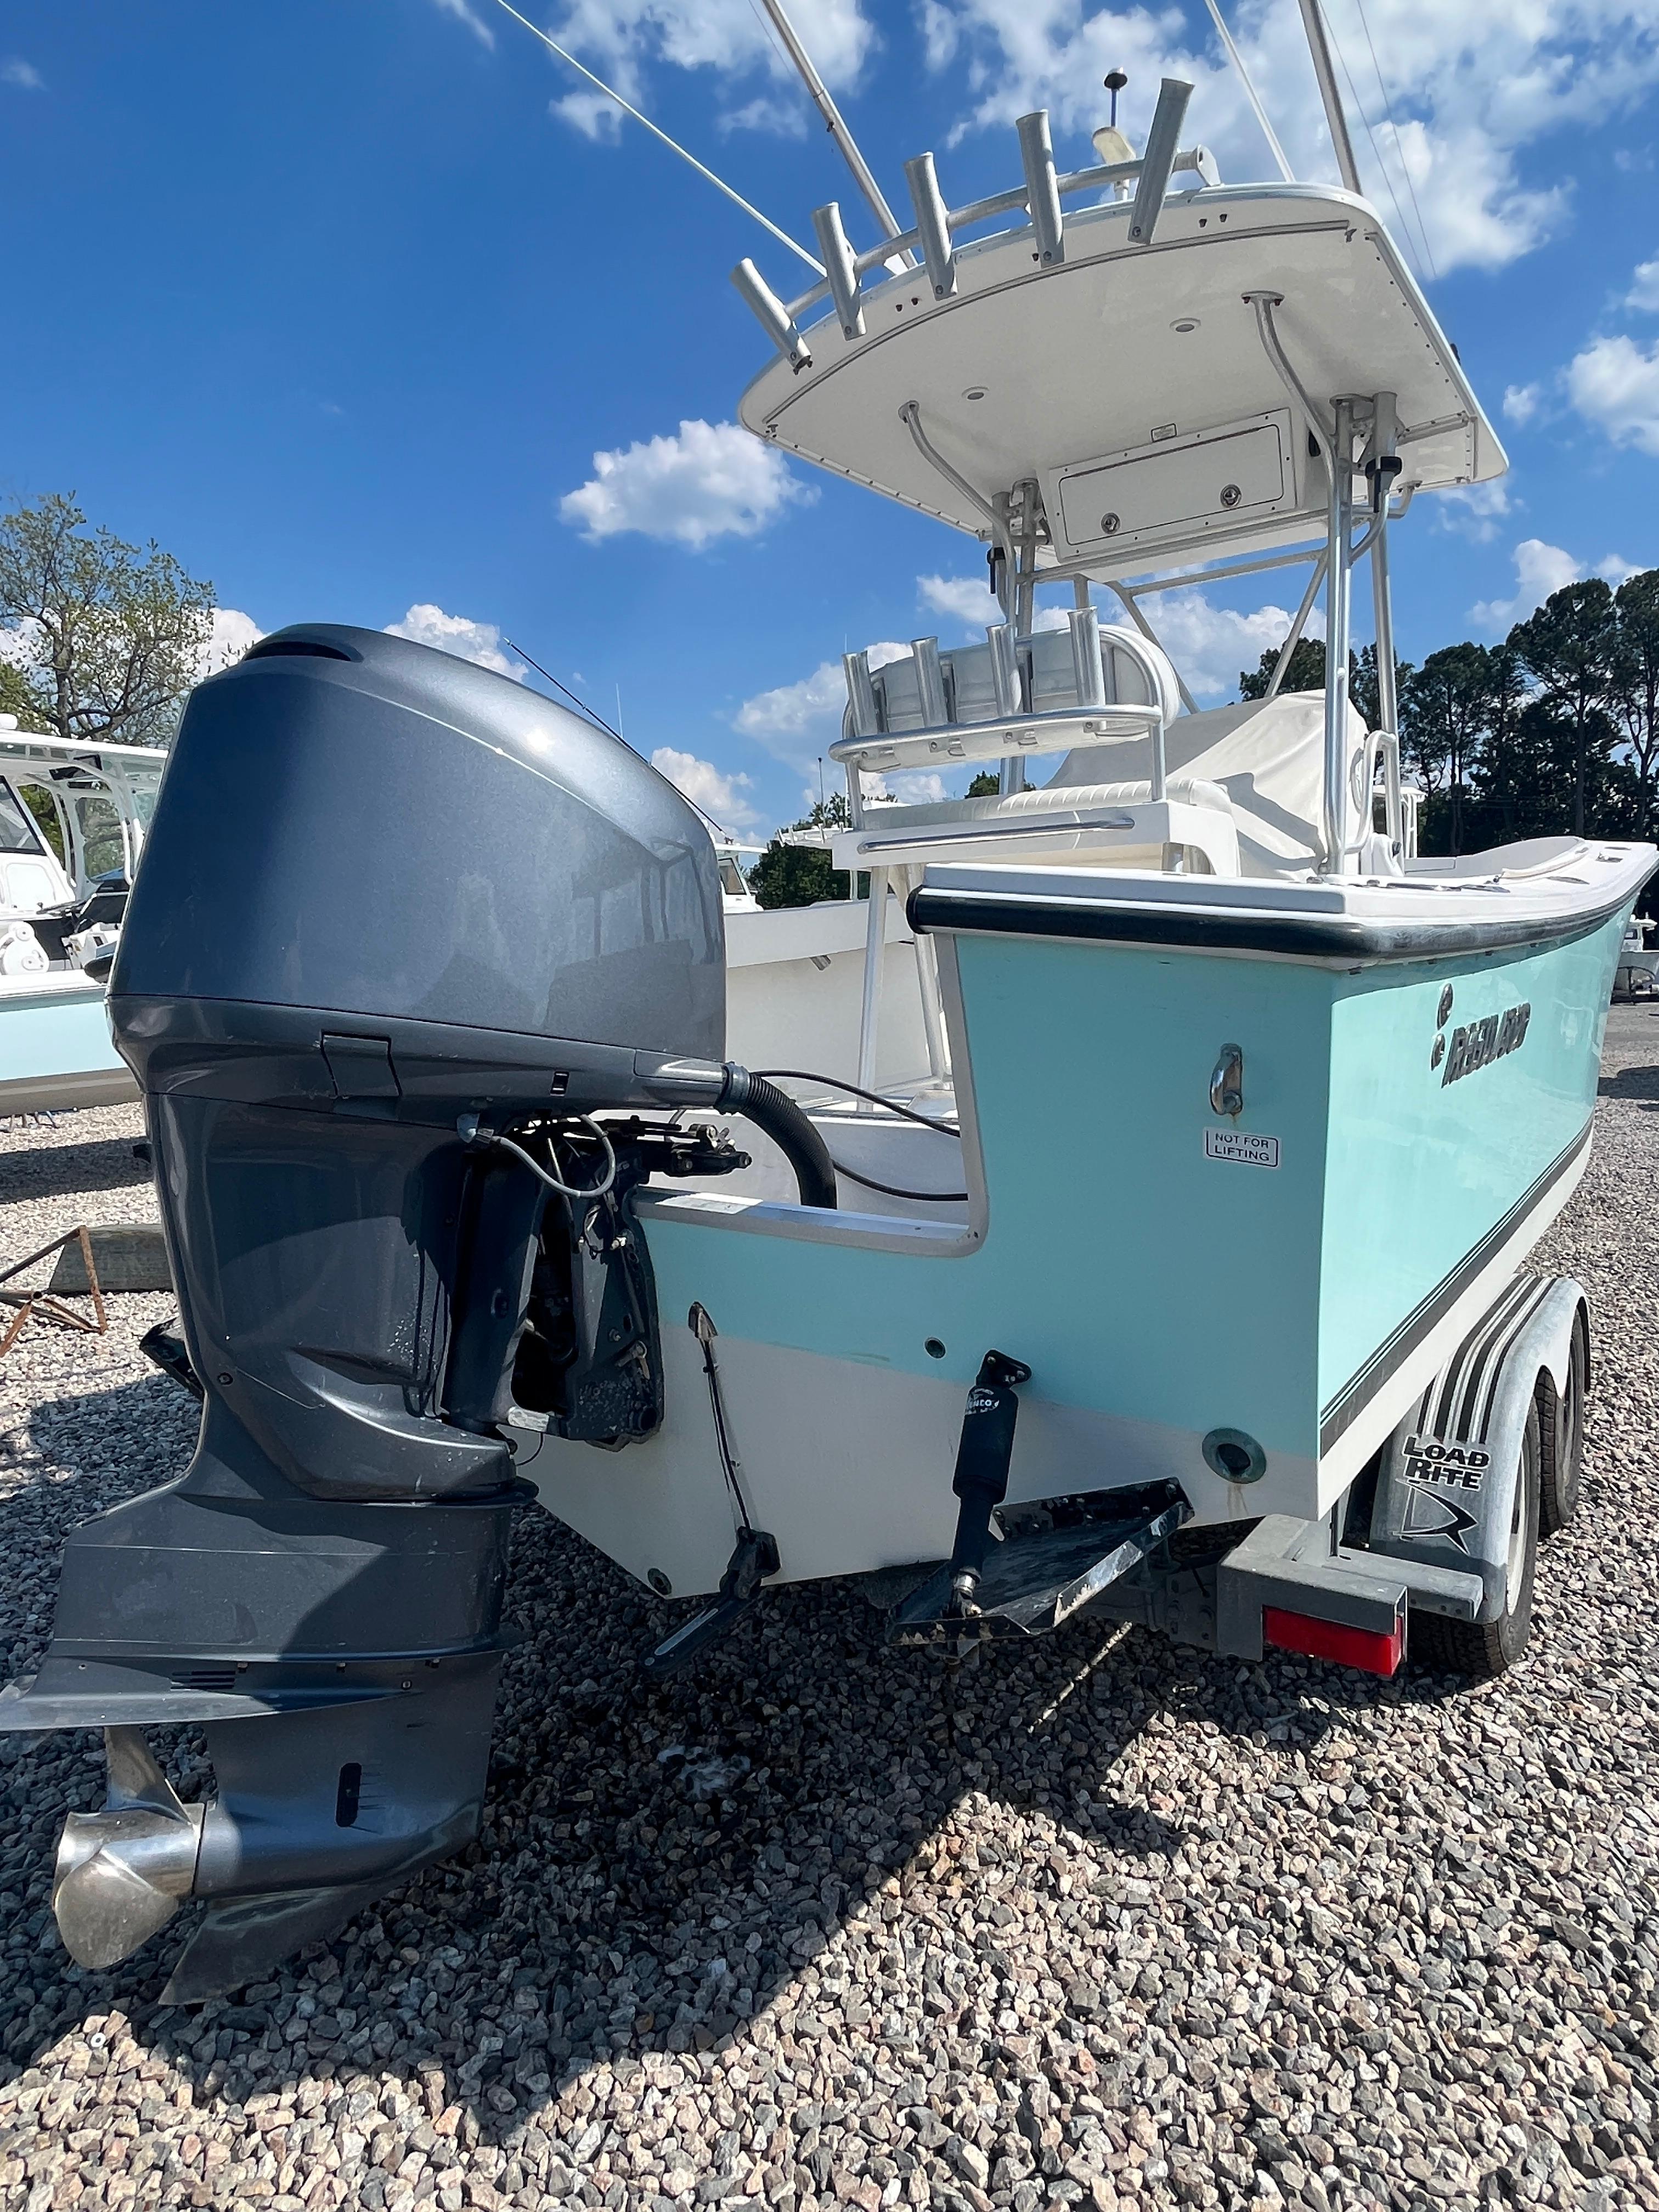 2003 Regulator 23 Classic, Yamaha 4 stroke 225hp outboard engine, stainless steel prop